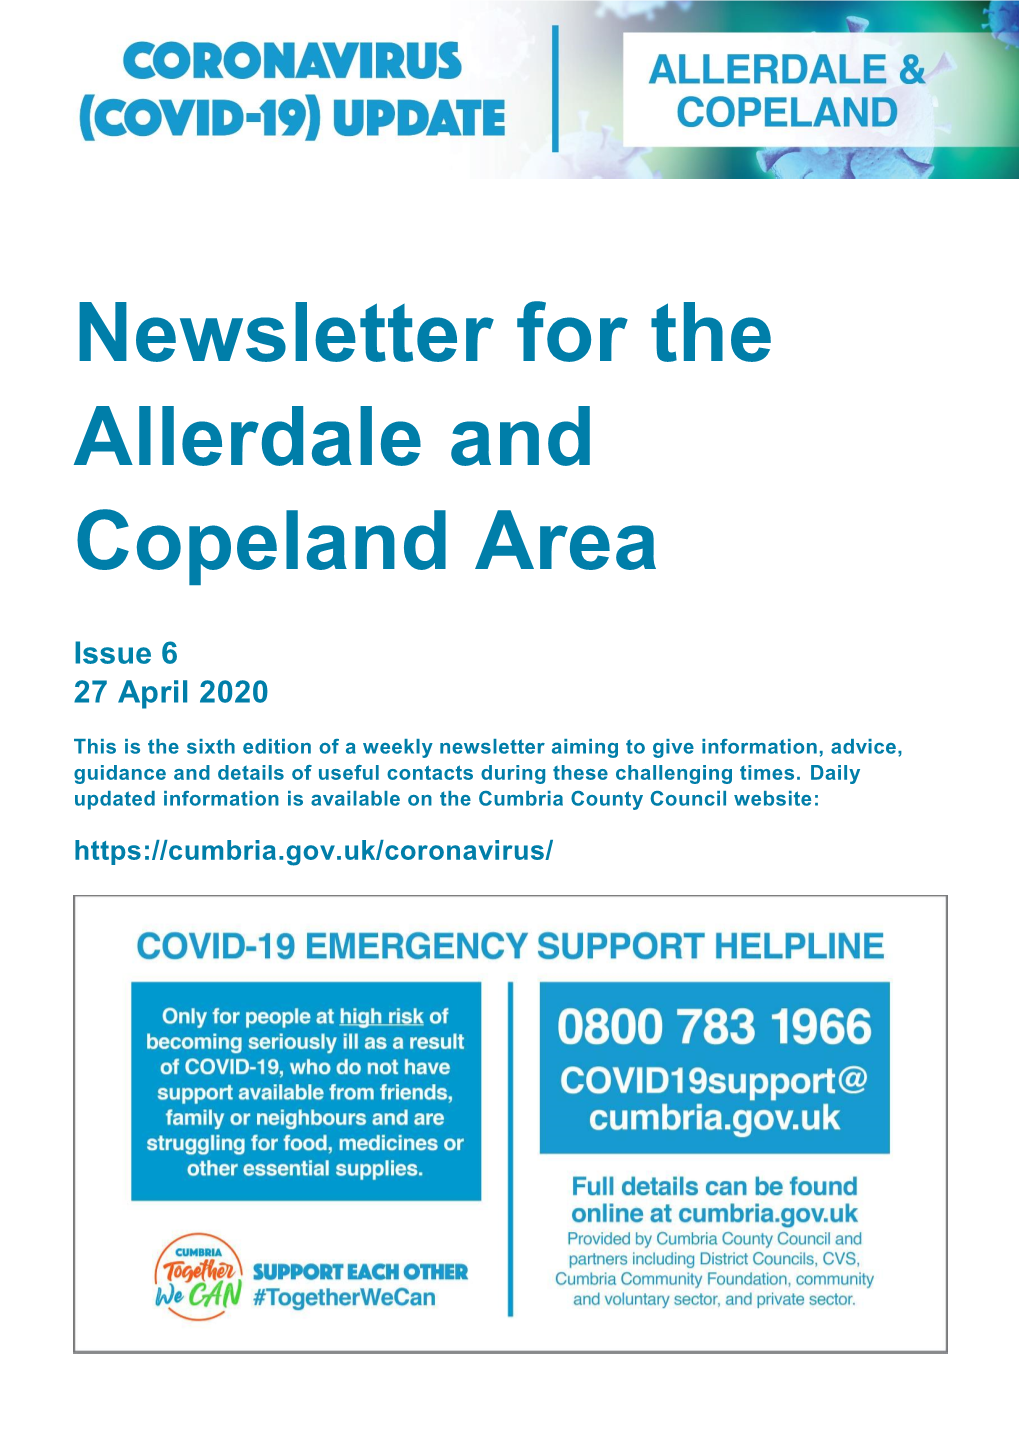 Newsletter for the Allerdale and Copeland Area